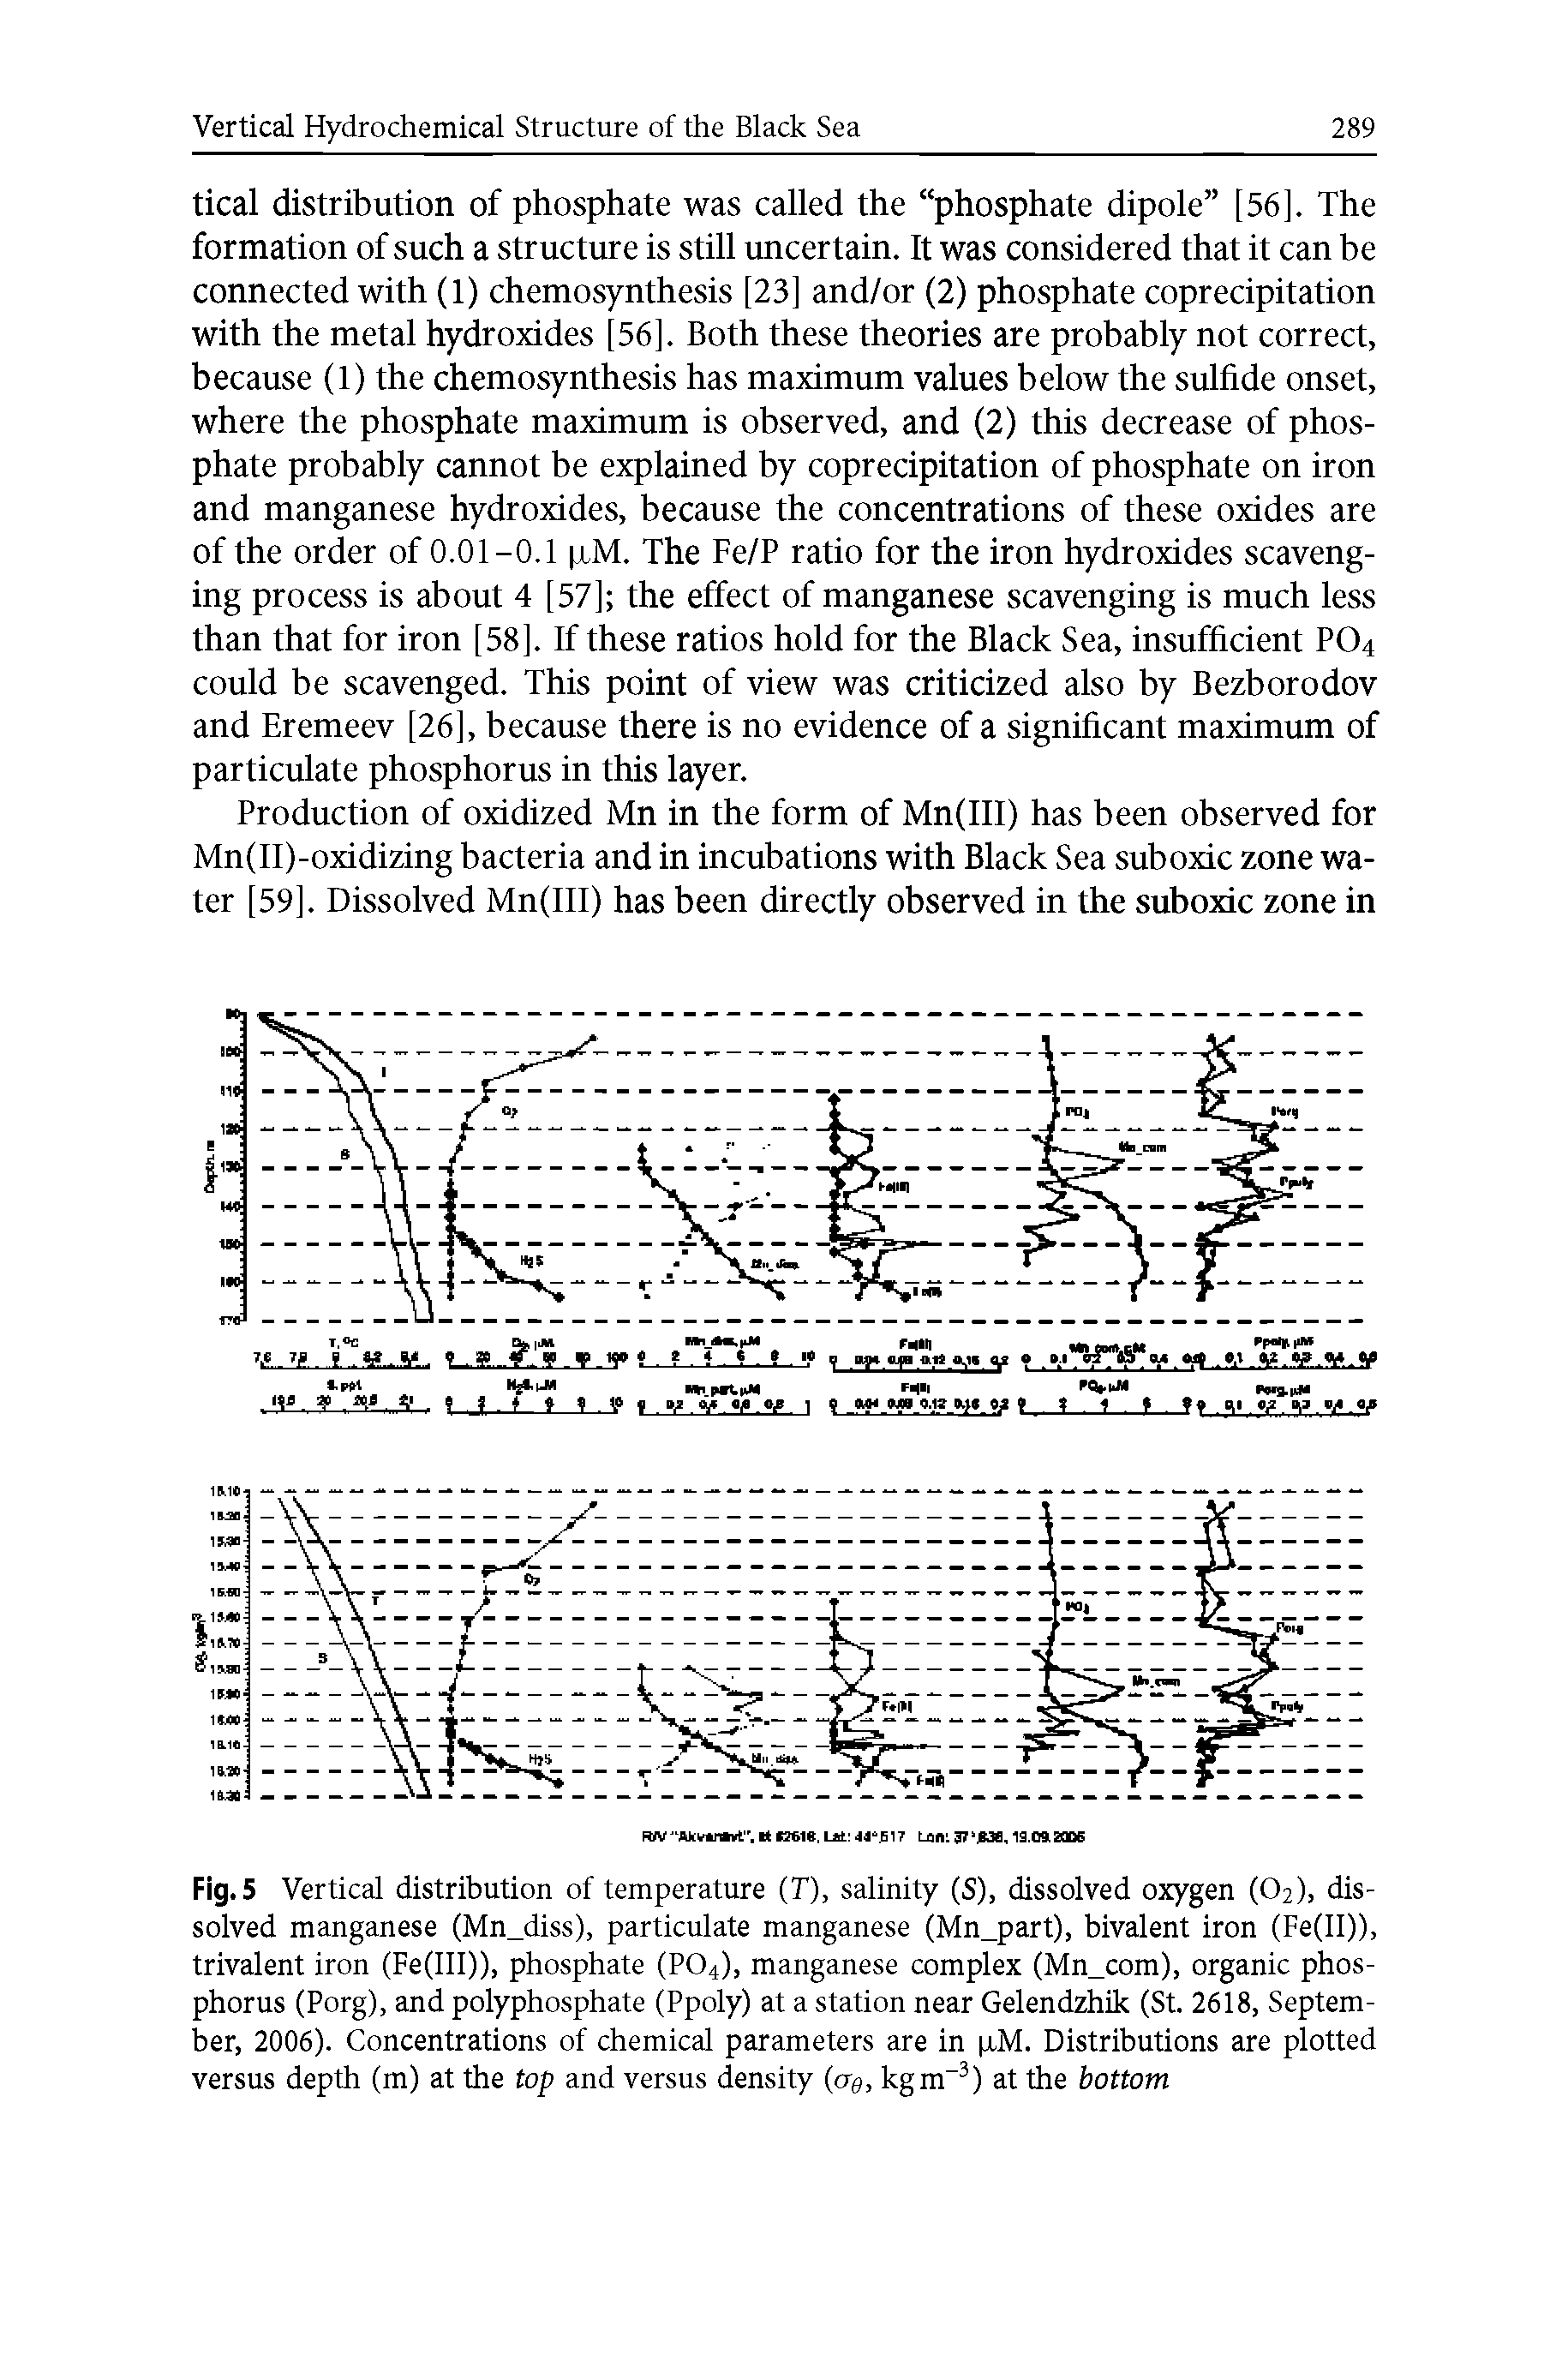 Fig. 5 Vertical distribution of temperature (T), salinity (S), dissolved oxygen (O2), dissolved manganese (Mn diss), particulate manganese (Mn part), bivalent iron (Fe(II)), trivalent iron (Fe(III)), phosphate (P04), manganese complex (Mn com), organic phosphorus (Porg), and polyphosphate (Ppoly) at a station near Gelendzhik (St. 2618, September, 2006). Concentrations of chemical parameters are in xM. Distributions are plotted versus depth (m) at the top and versus density (og, kgm-3) at the bottom...